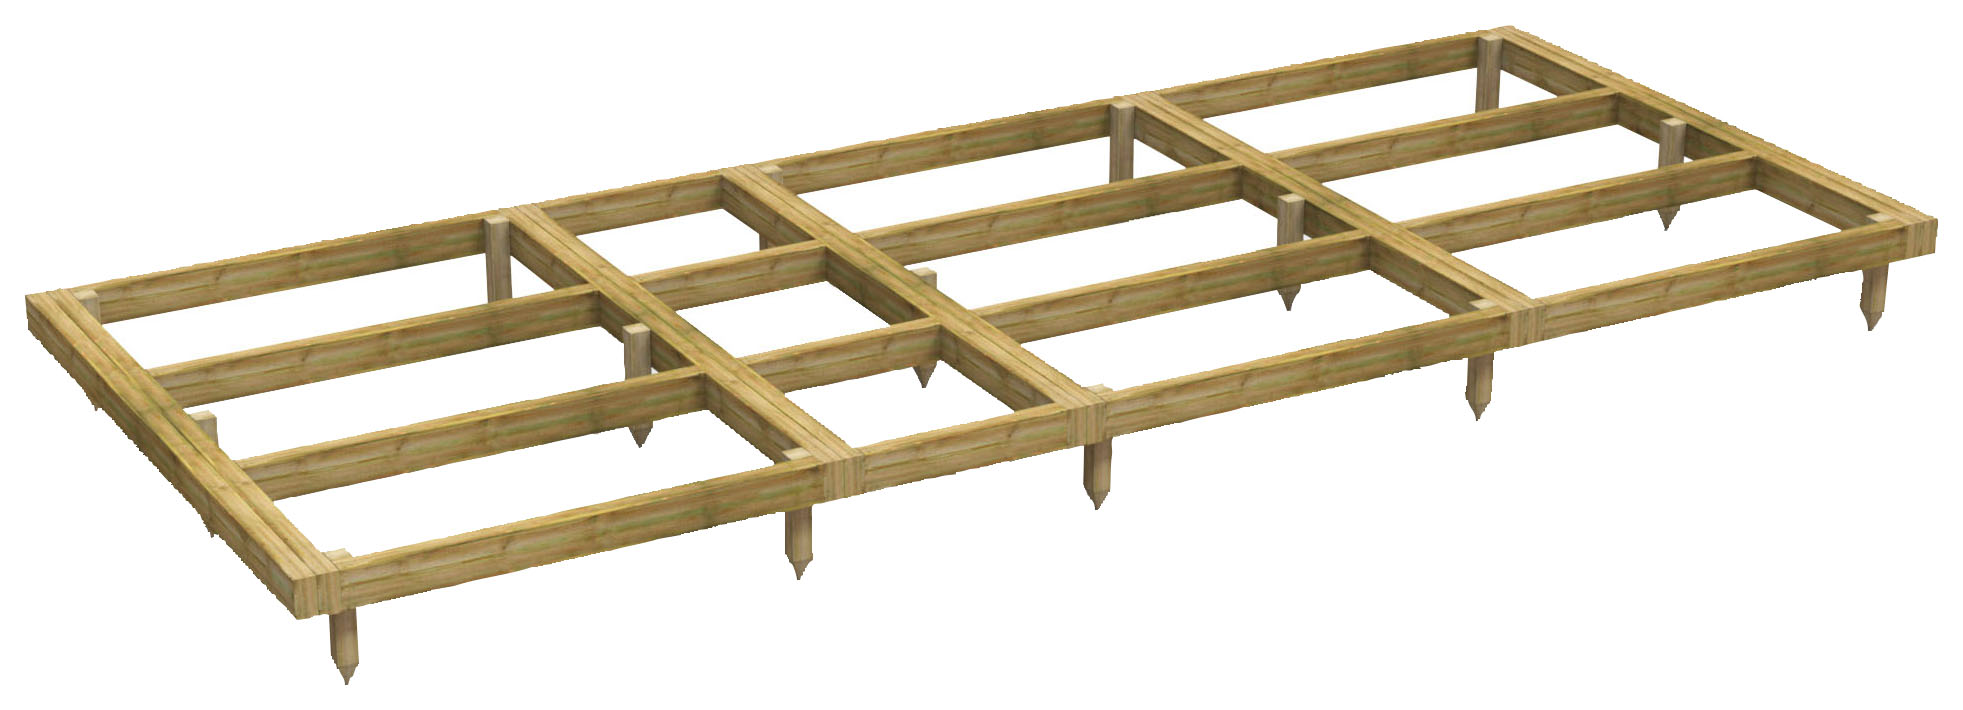 Image of Power Sheds 14 x 6ft Pressure Treated Garden Building Base Kit